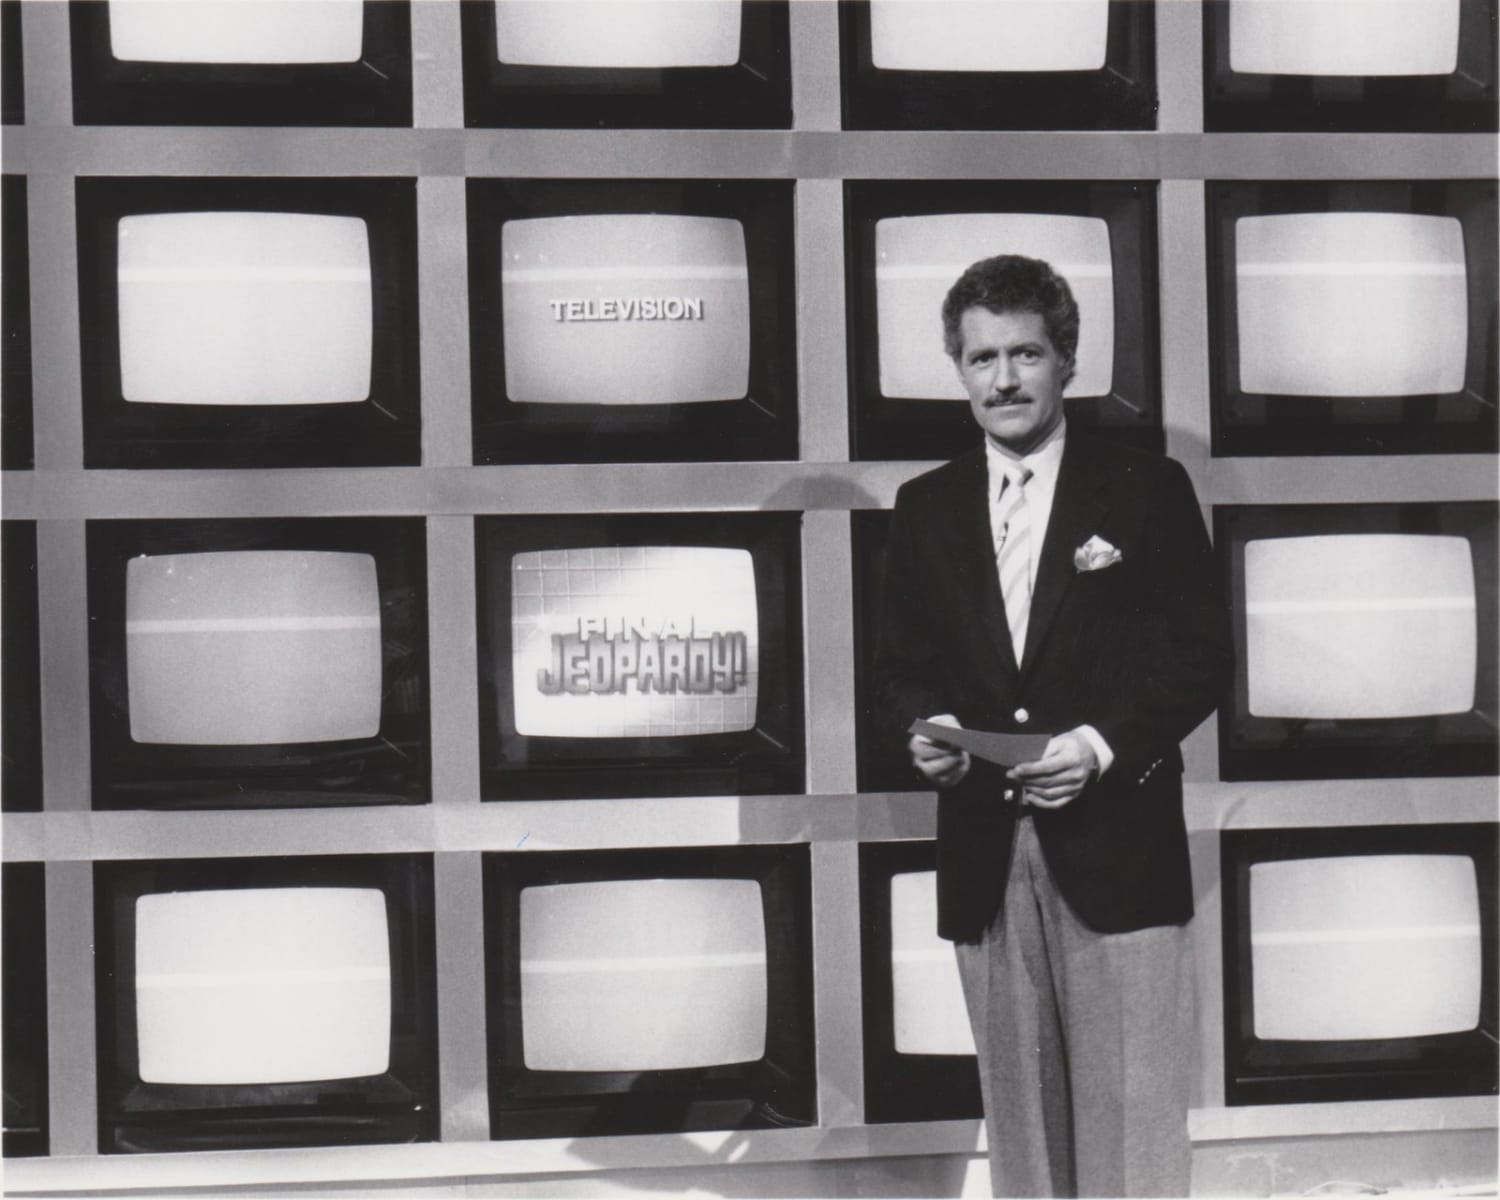 From 'Jeopardy' to 'Wheel of Fortune,' Archive Will Preserve Game Show History